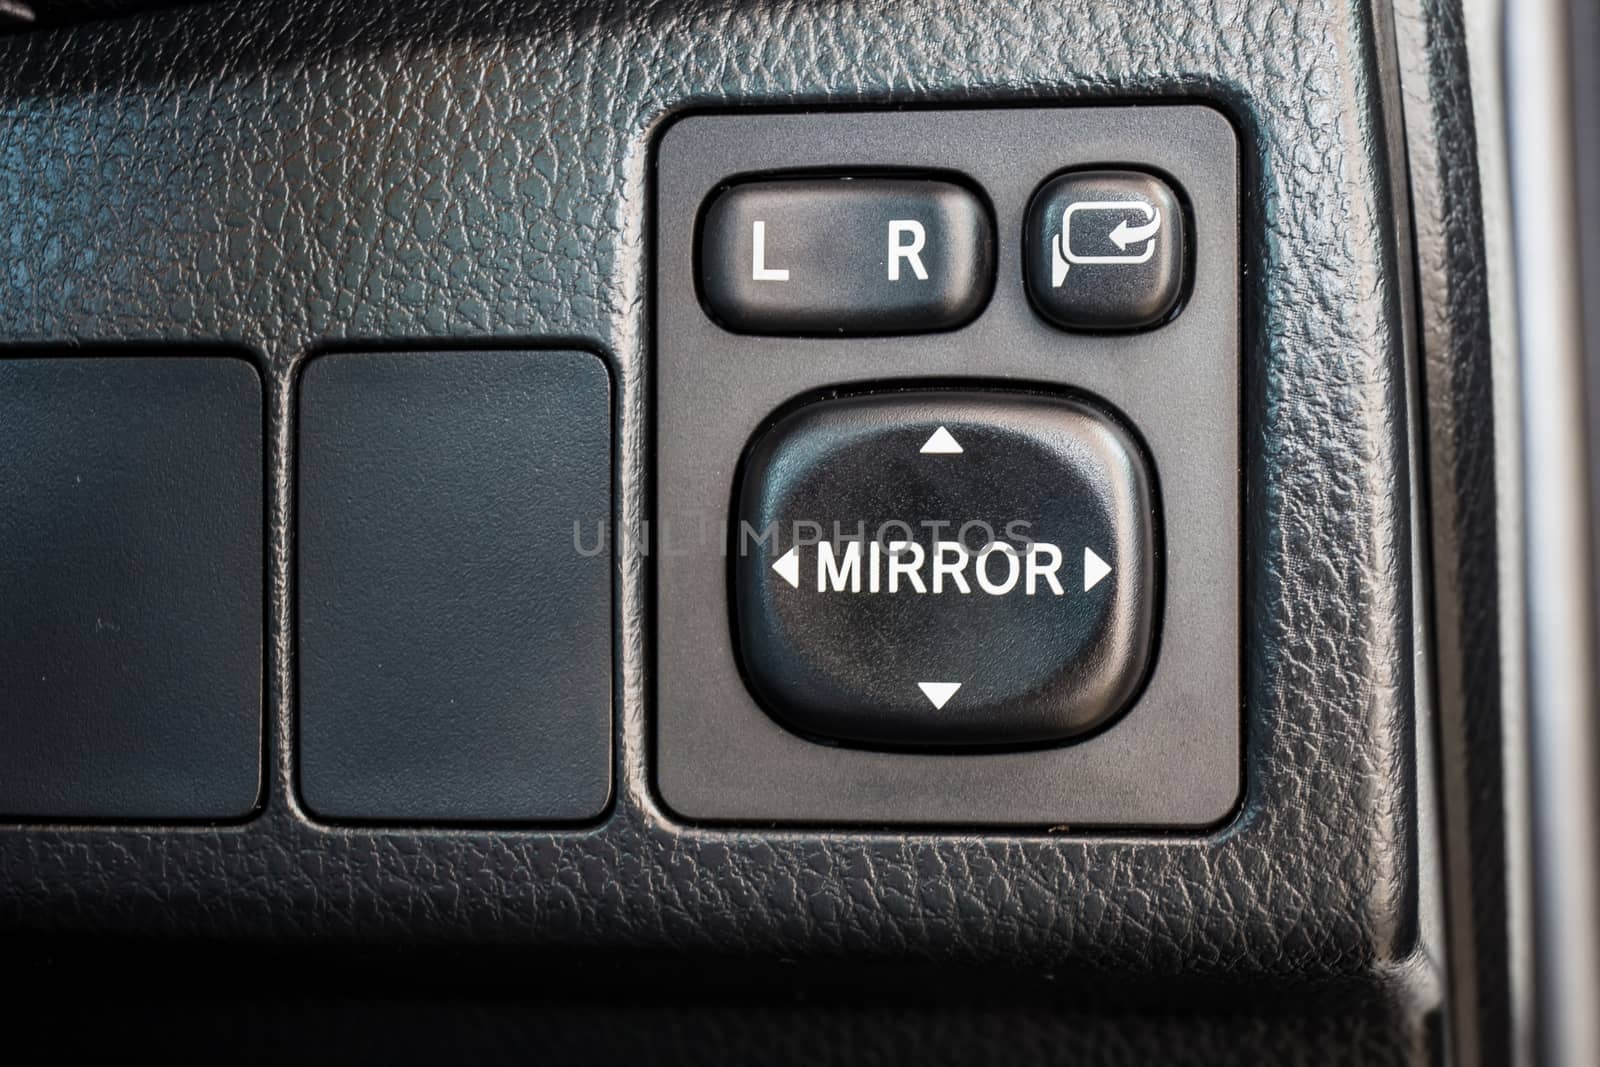 Switch button adjust or controls side mirrors in a car by powerbeephoto